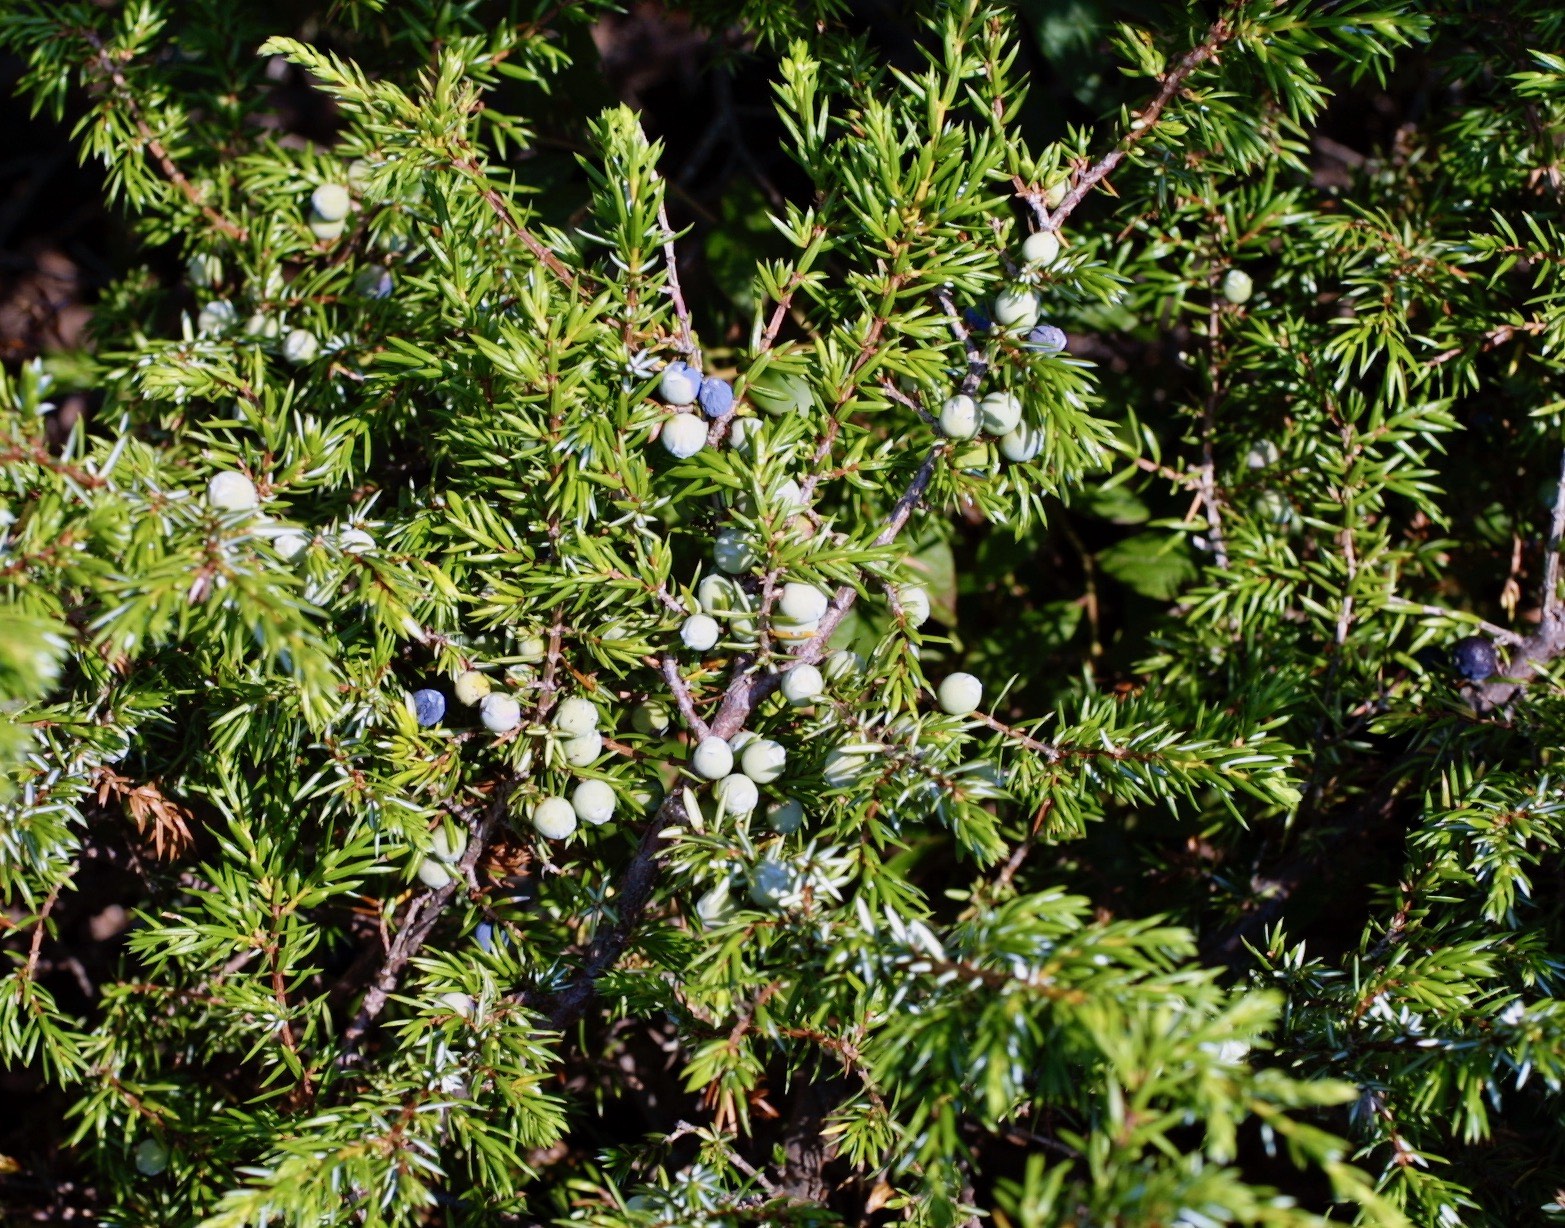 The Scientific Name is Juniperus communis var. depressa. You will likely hear them called Ground Juniper, Mountain Juniper, Common Juniper. This picture shows the Low-growing evergreen shrub with needles in whorls of 3; female cones are blue to black with a waxy coating of Juniperus communis var. depressa